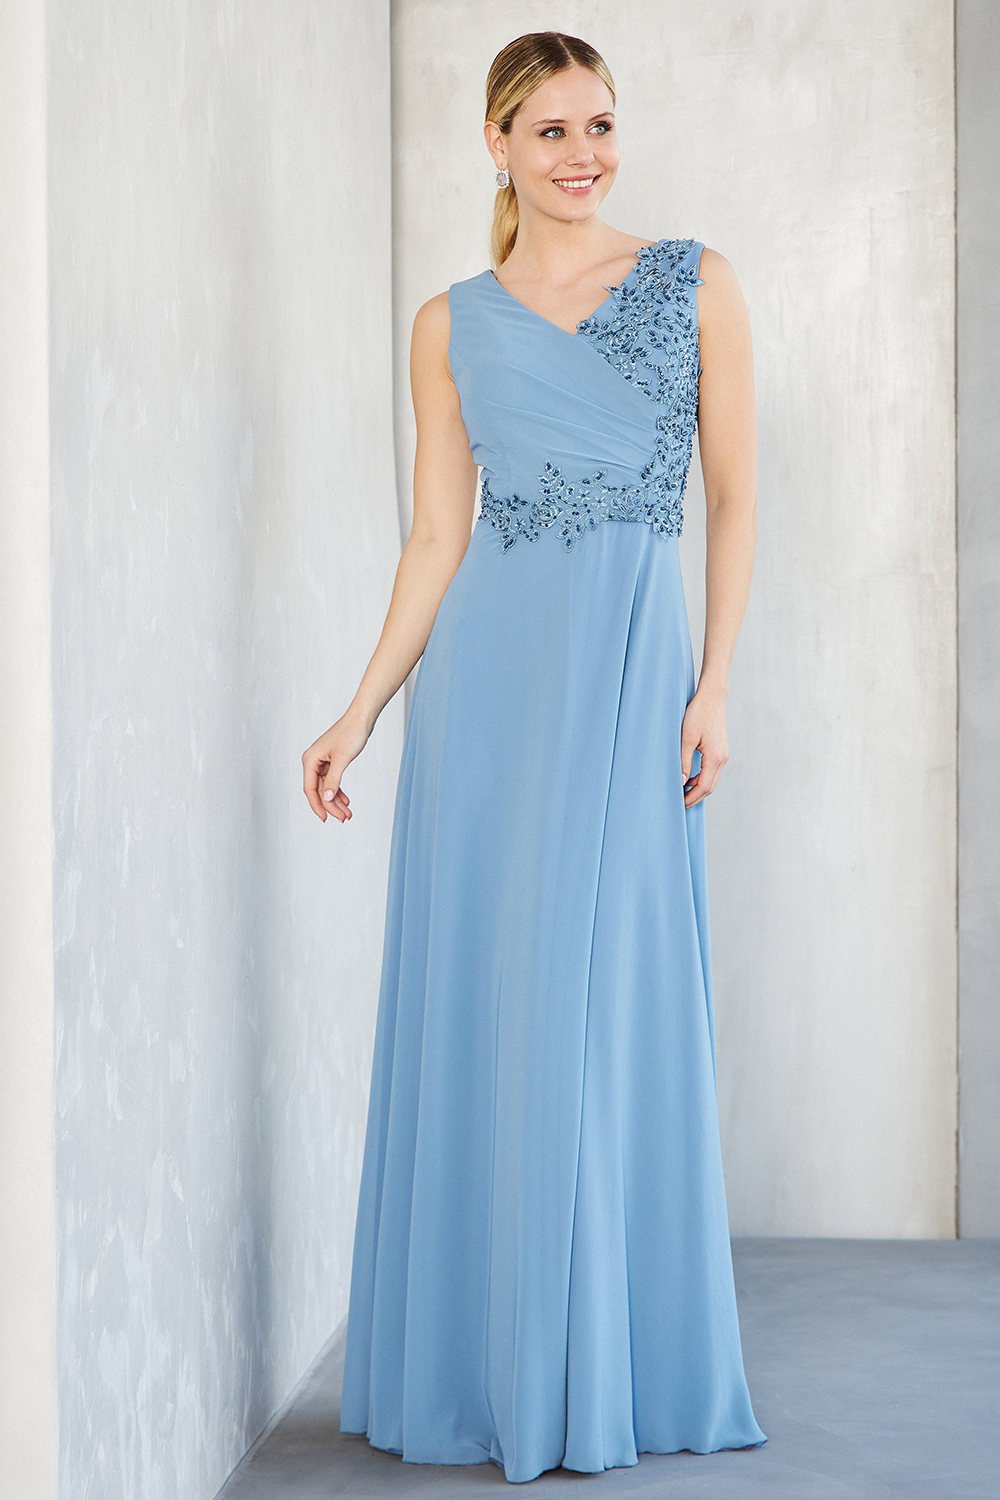 Классические платья / Long evening dress with chiffon fabric, lace top with beading and straps